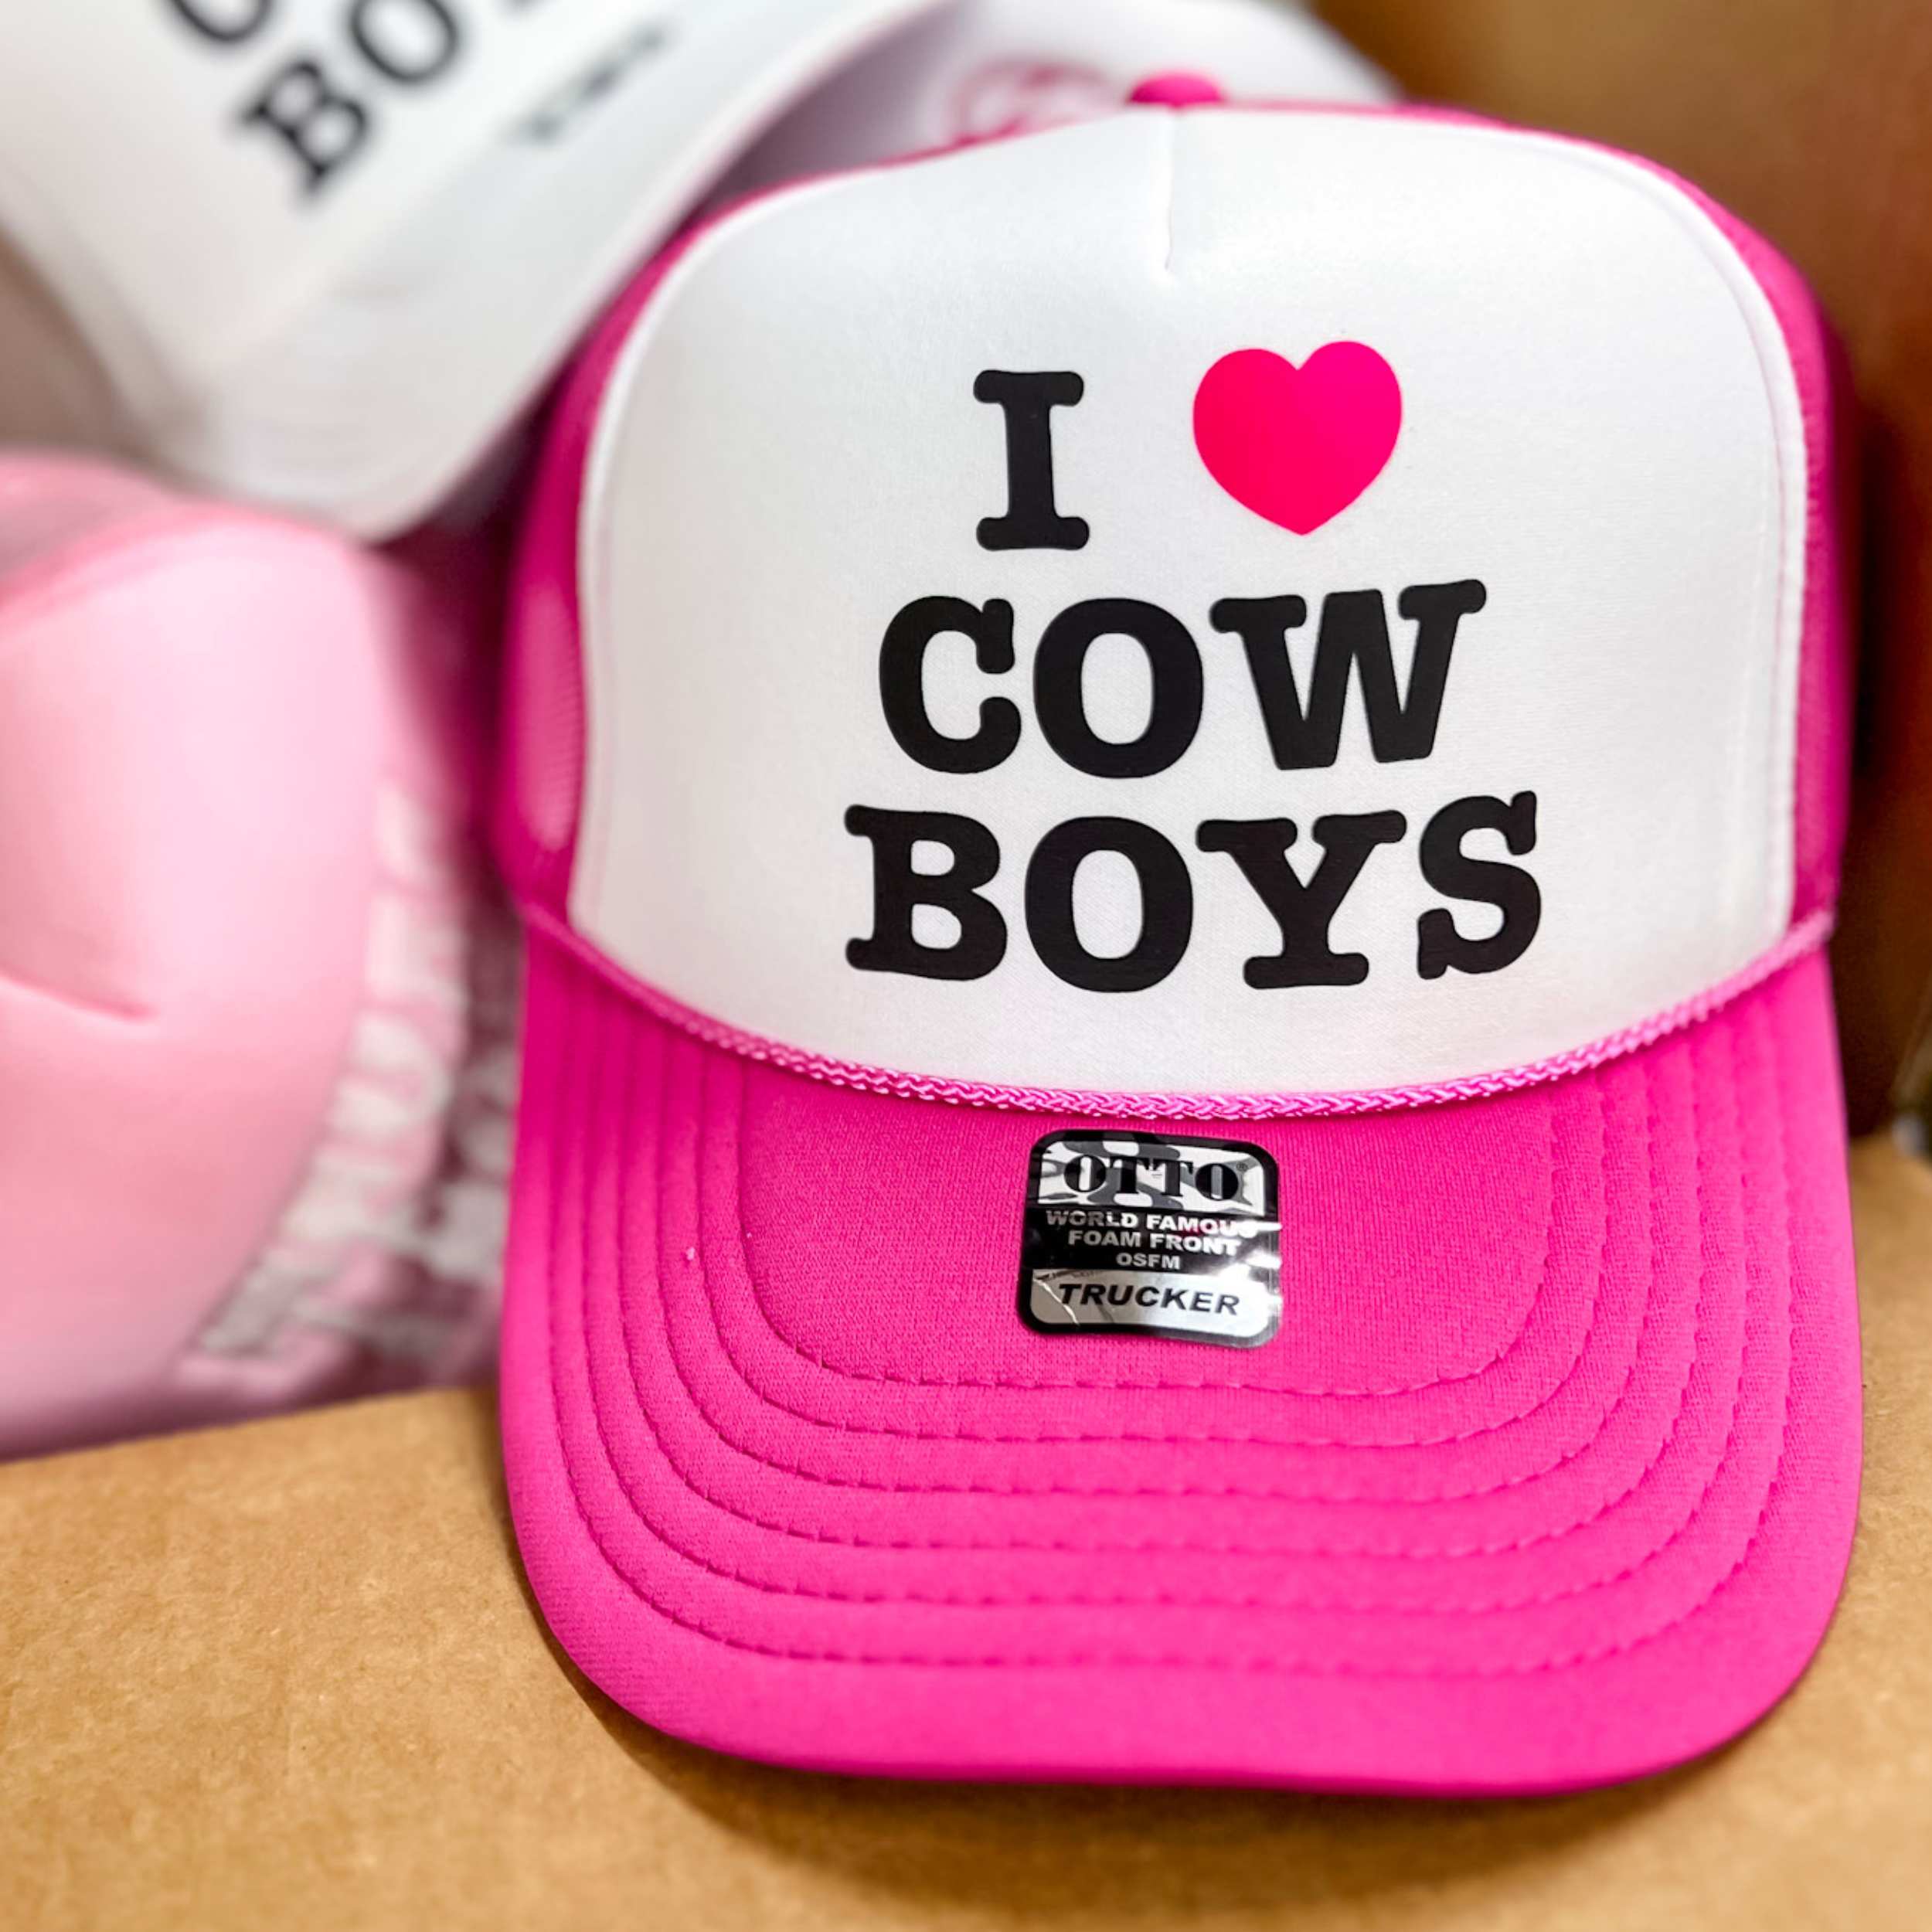 Photo features a hot pink and white trucker hat with "I heart Cowboys" on the front.